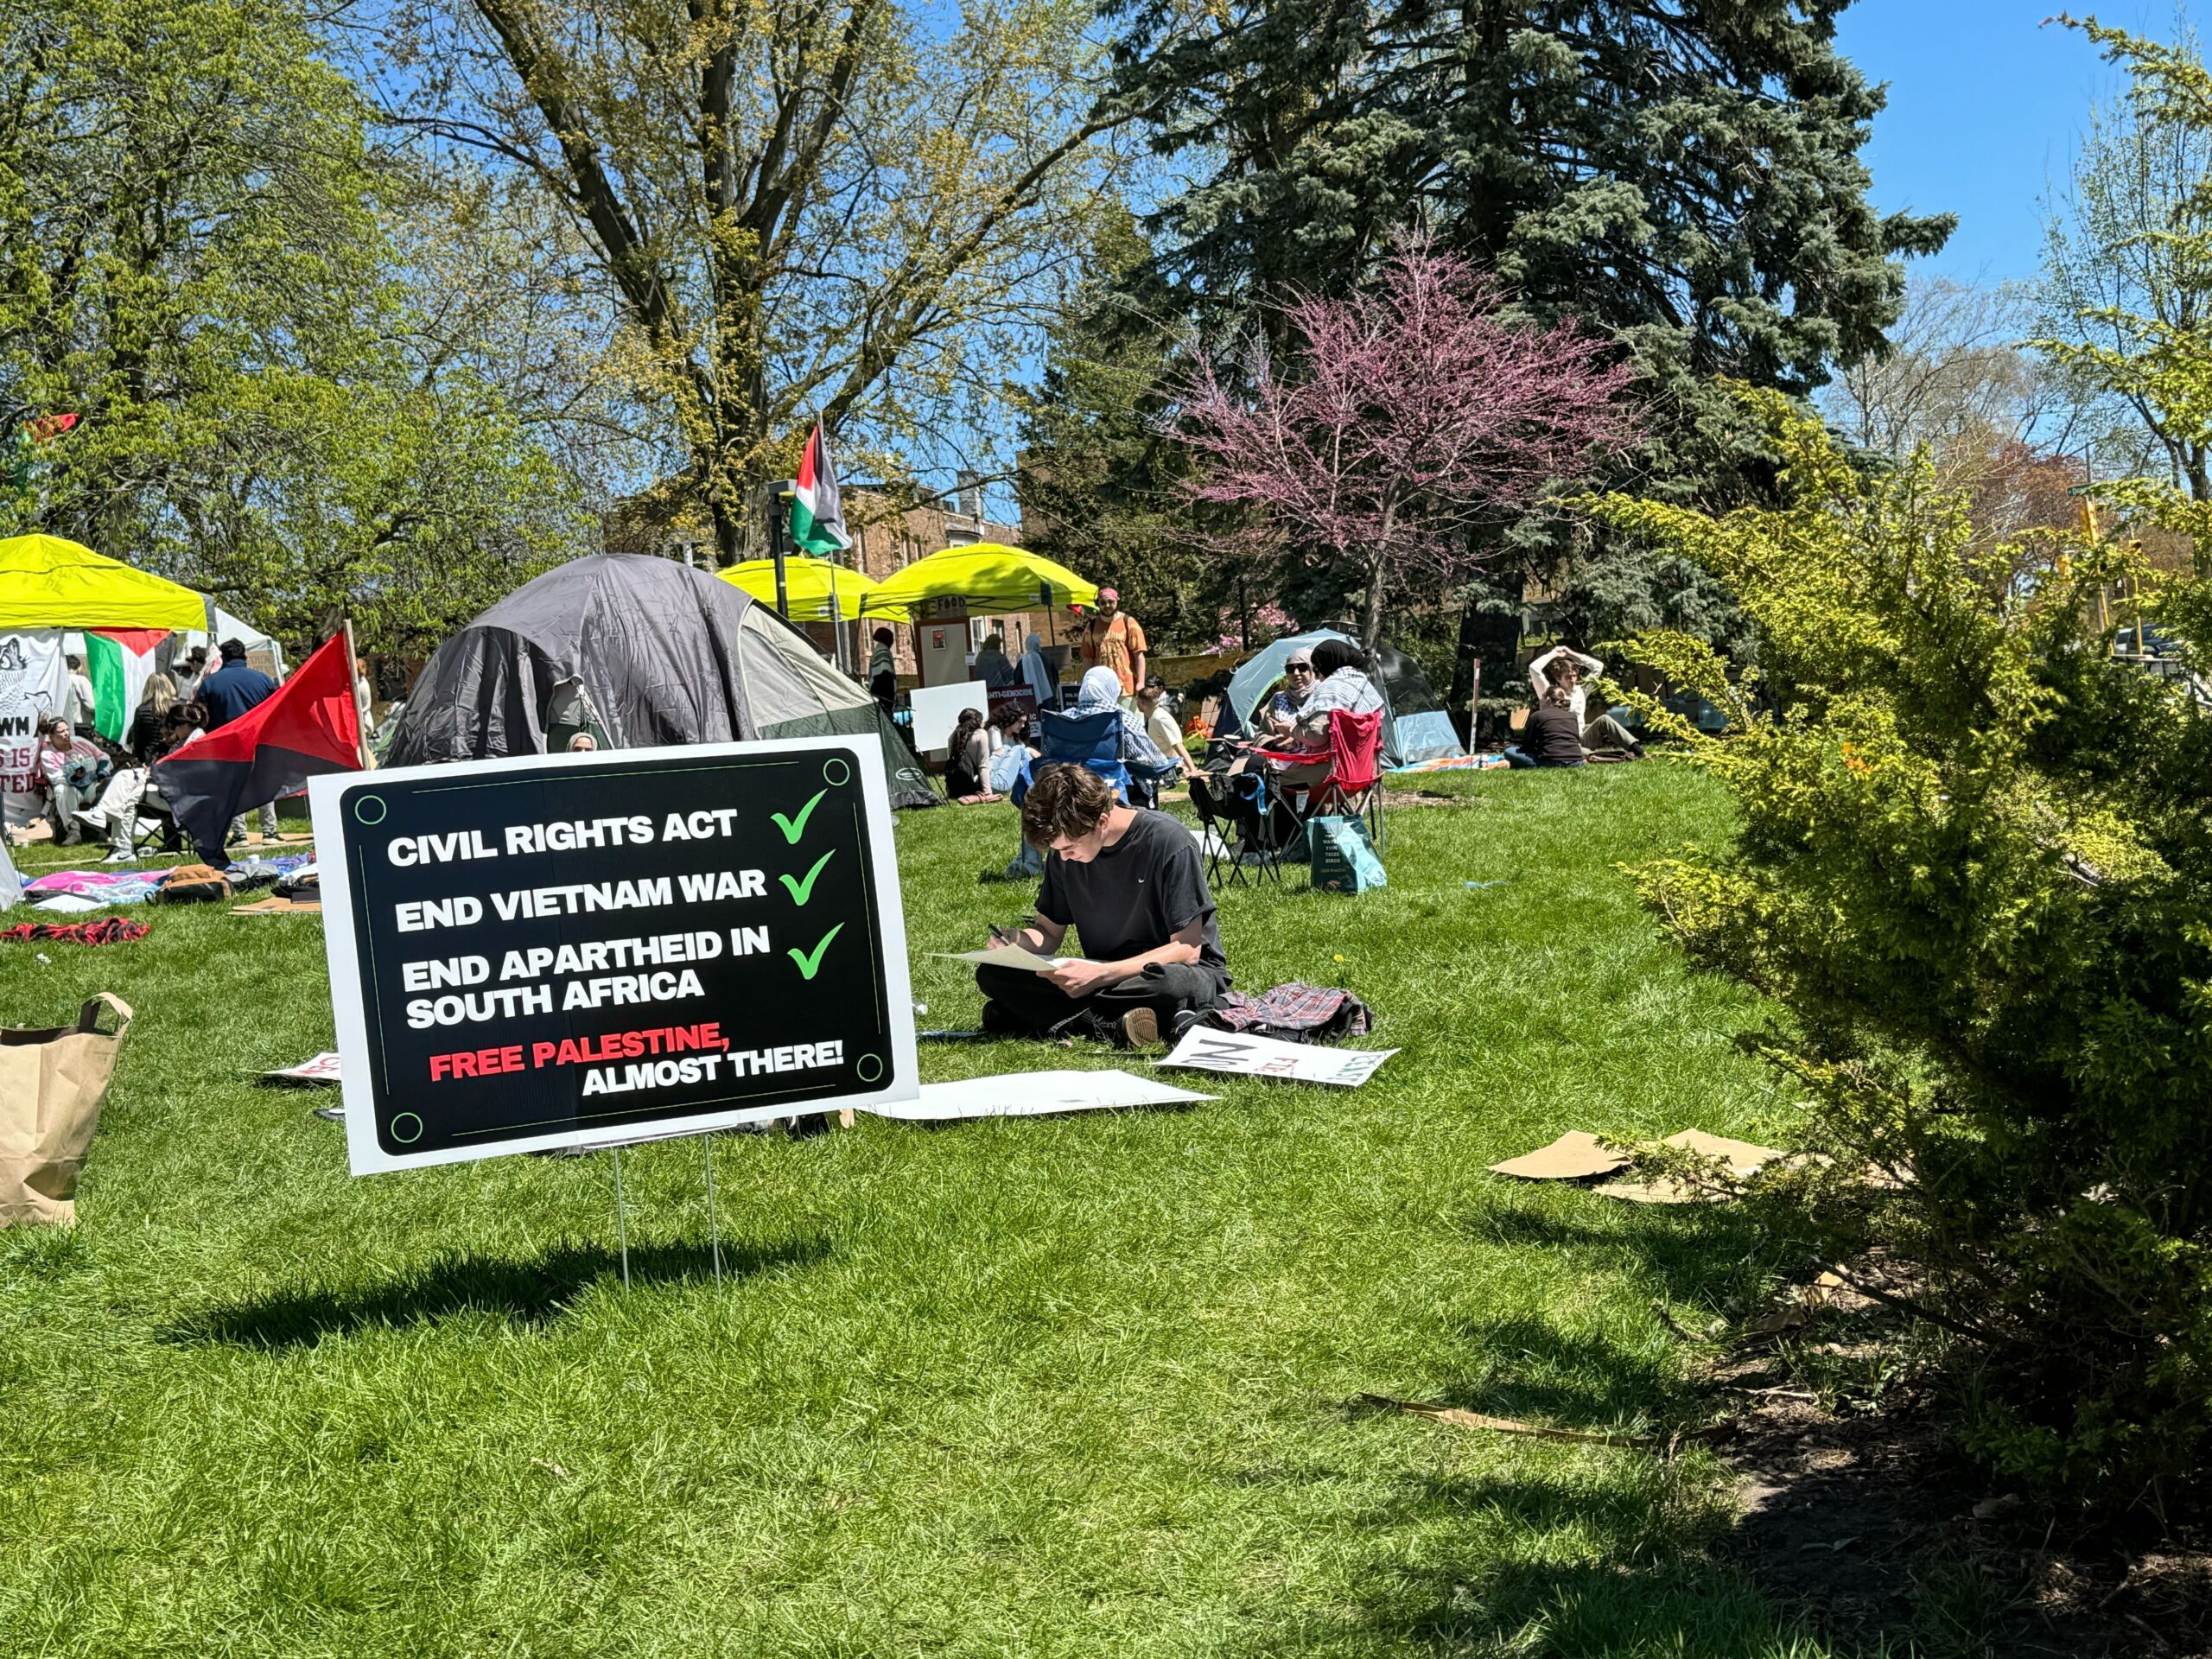 A black sign in the grass reads "Civil Rights Act (checkmark, End Vietnam War (checkmark), End apartheid in South Africa (checkmark), Free Palestine, almost there!" Behind the sign are tents and lawn chairs with people scattered about.